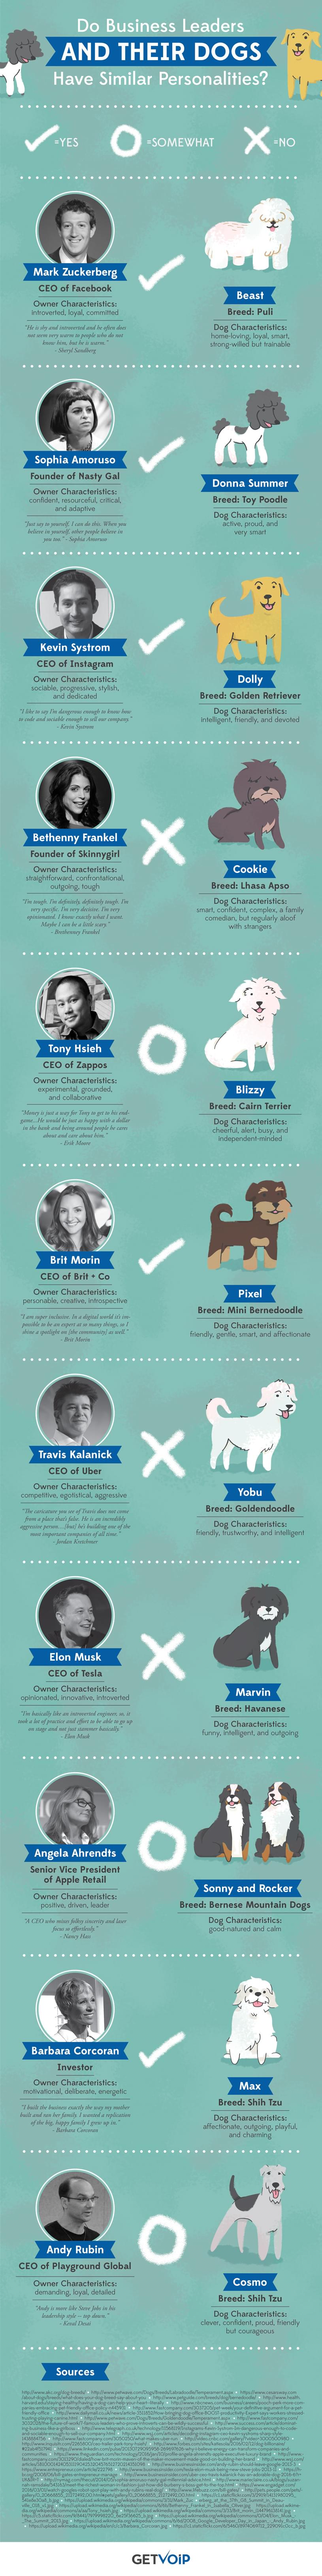 The-dogs-of-the-world's-most-successful-business-leaders